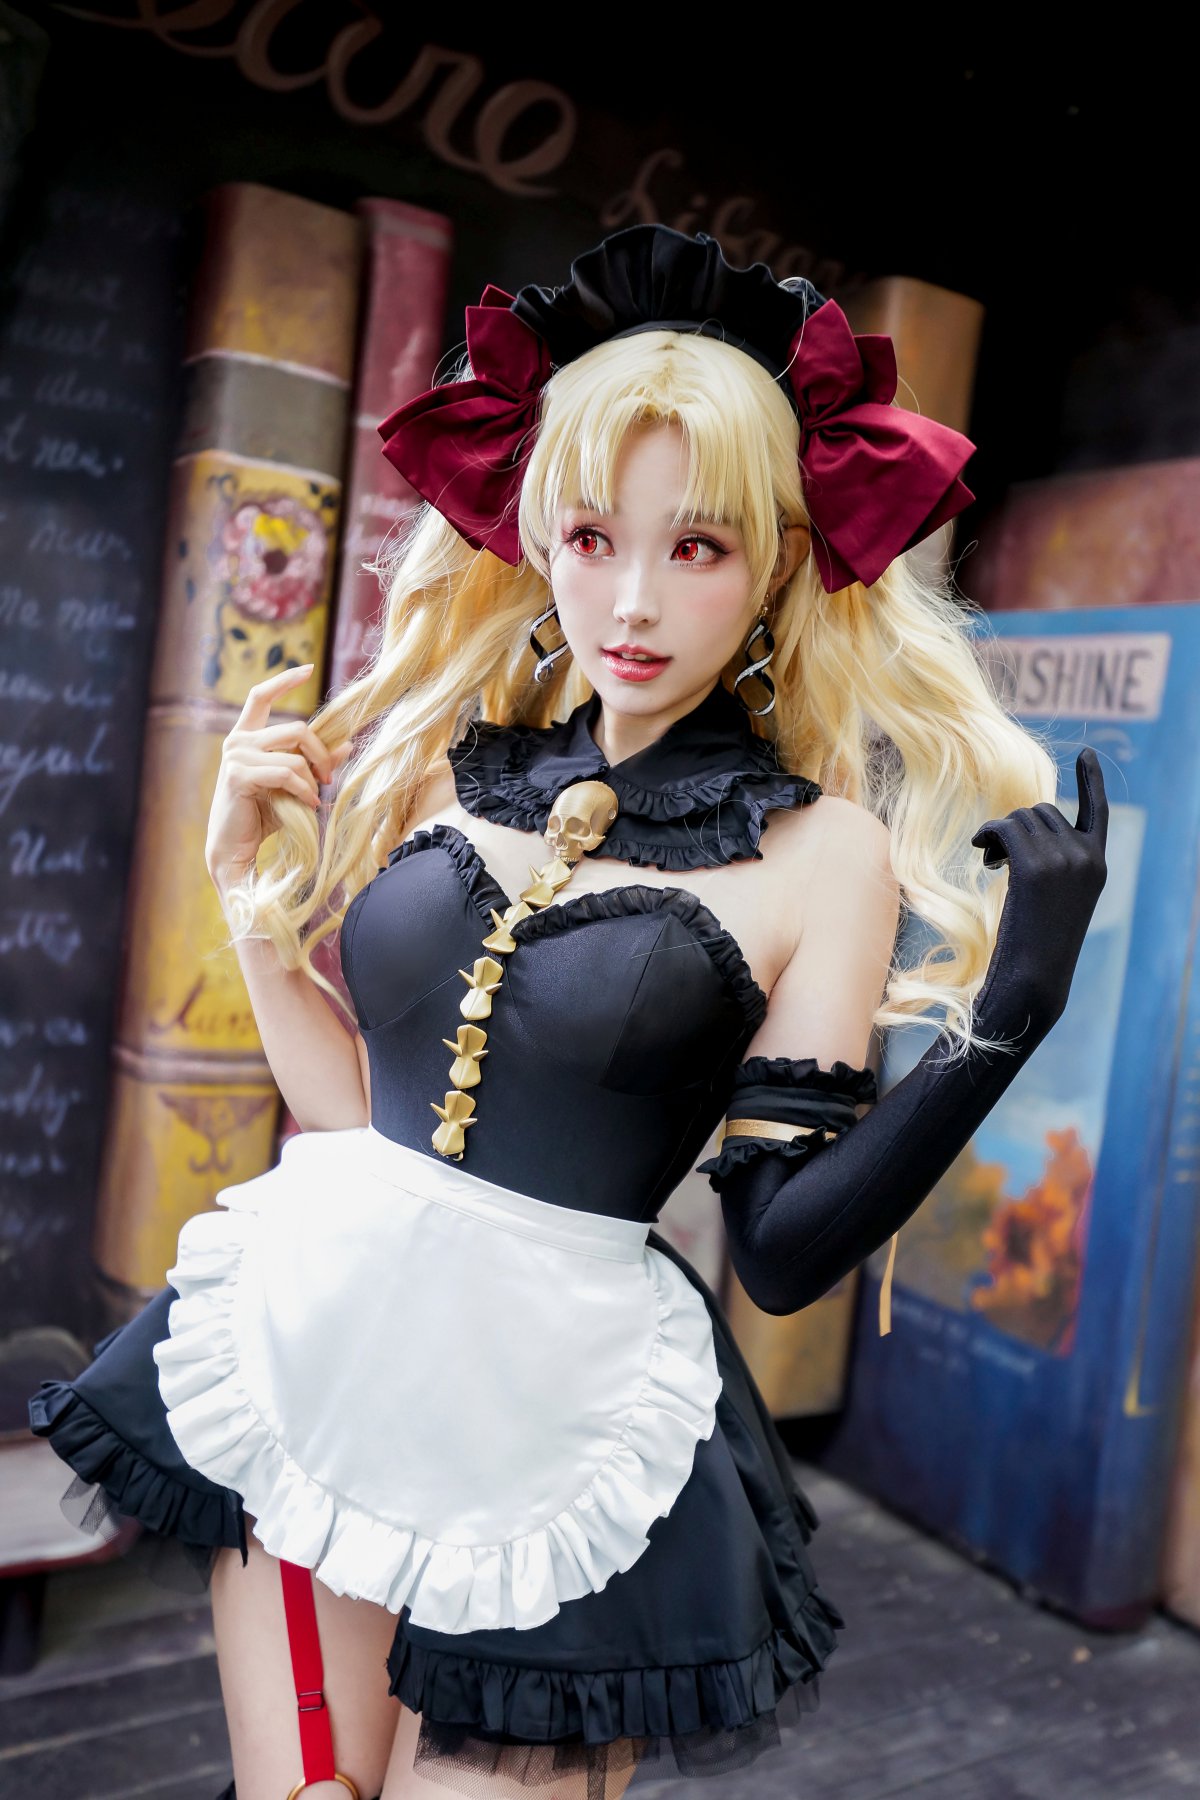 Coser@Ely Vol.022 ERE エレシュキガル 写真 A 0049